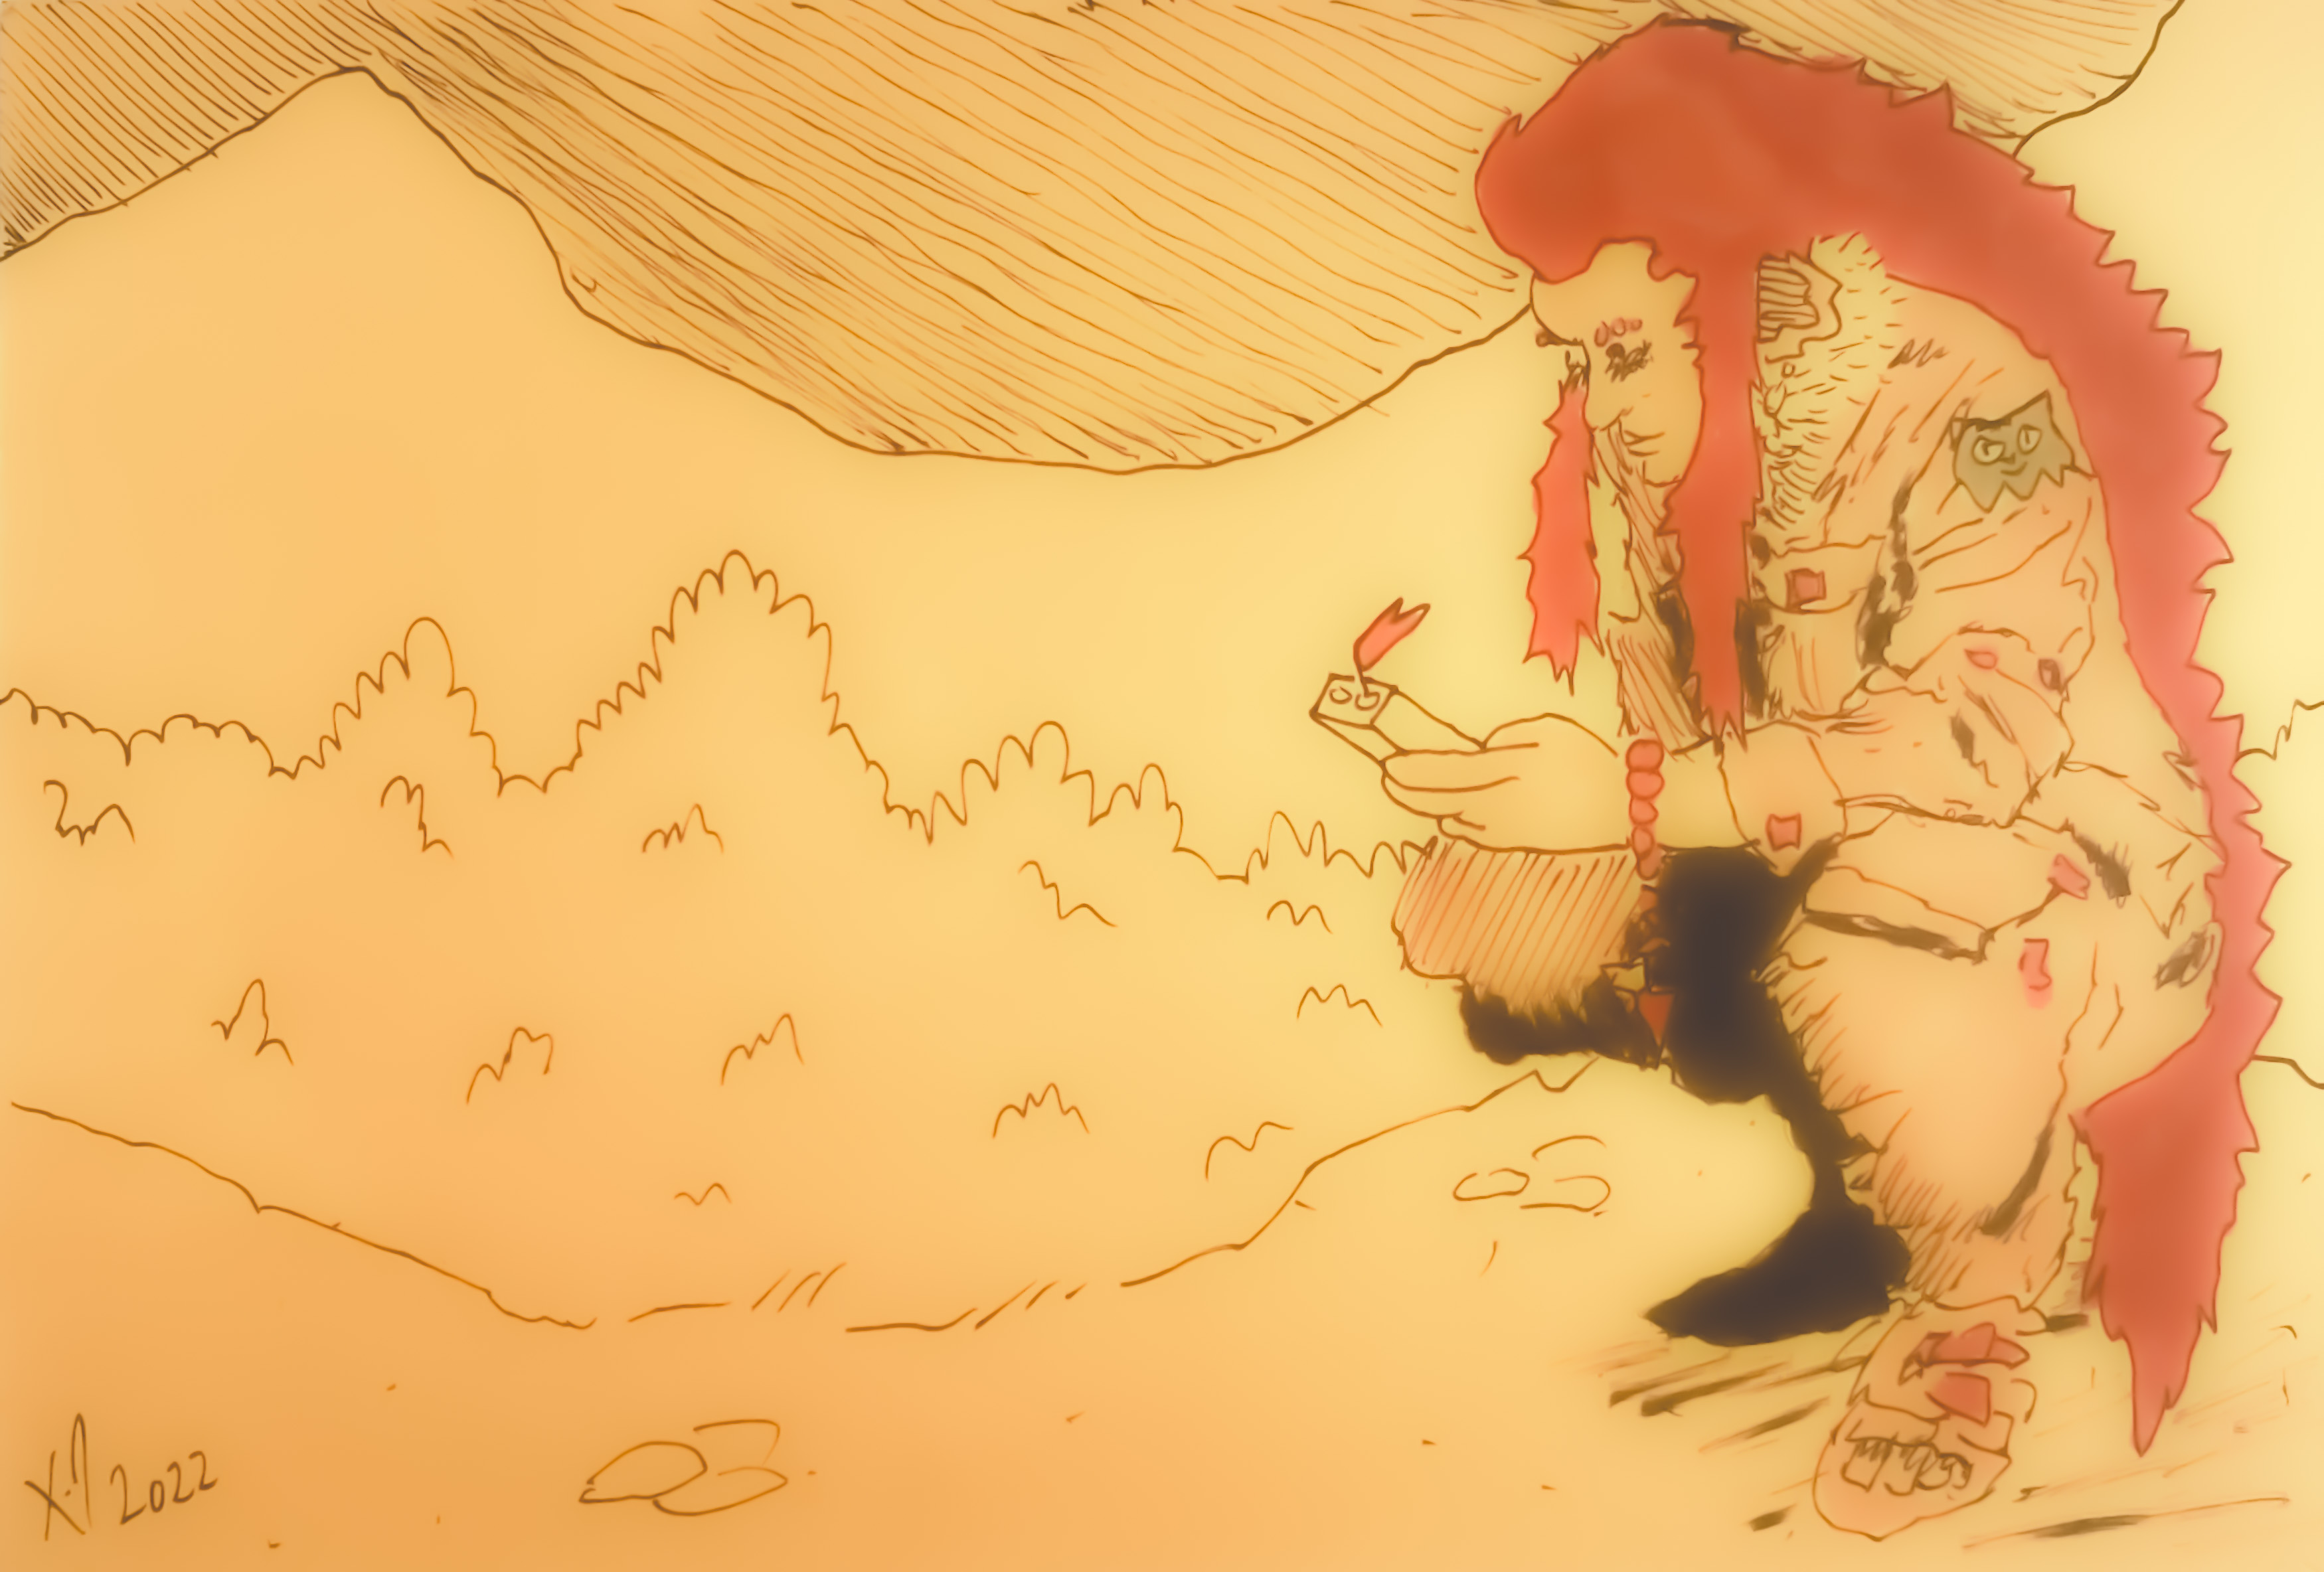 a goblin is crouched down in the desert with some sort of device, scanning the area perhaps, the goblin's long body length hair is red and clothes are orange, and the background is a bright desaturated orangey yellow color, the image is soft and glowing